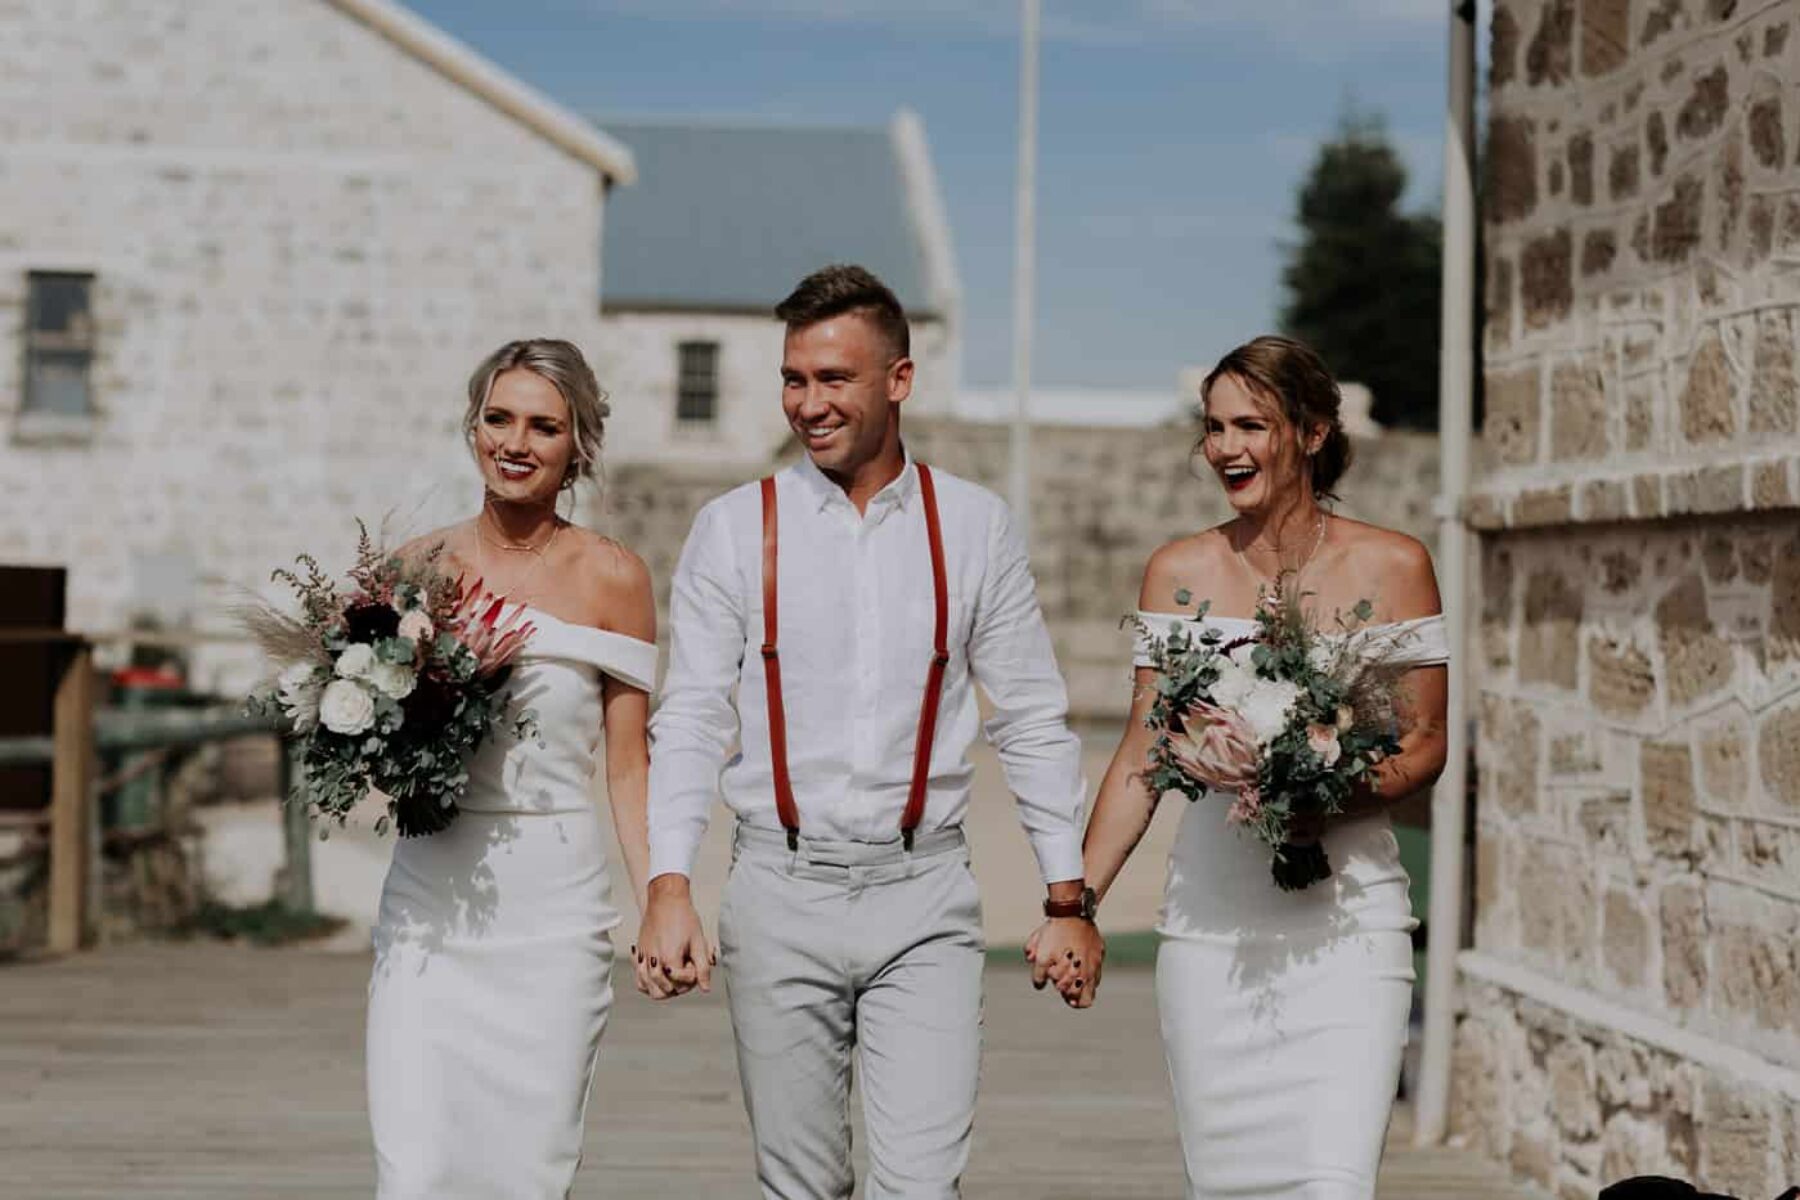 modern bridesmaid (and 'bromaid') in white dresses